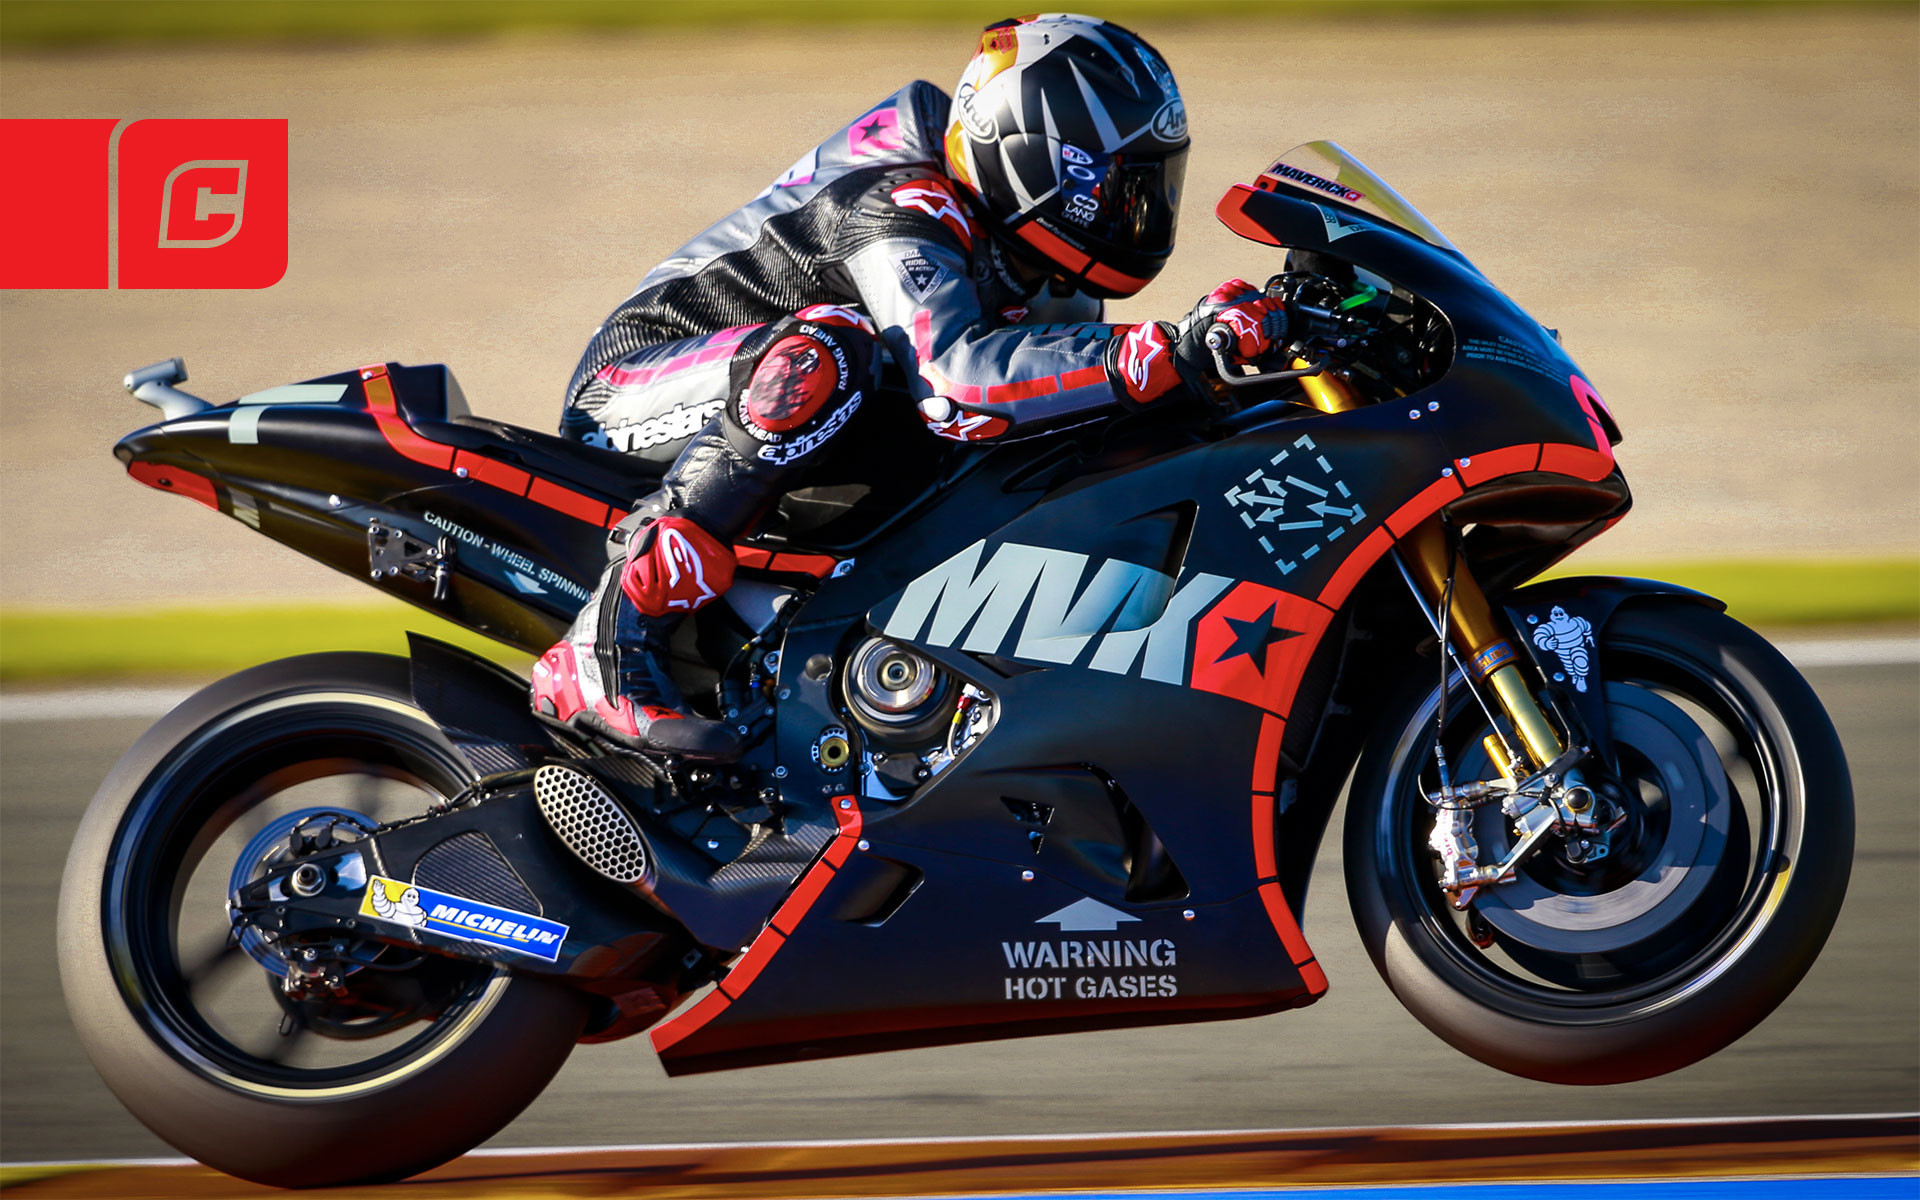 1920x1200 ... the 2017 MotoGP World Championship, Maverick Vinales was quickest on  days one and two of the post-season Valencia test, placing him as one of  the early ...